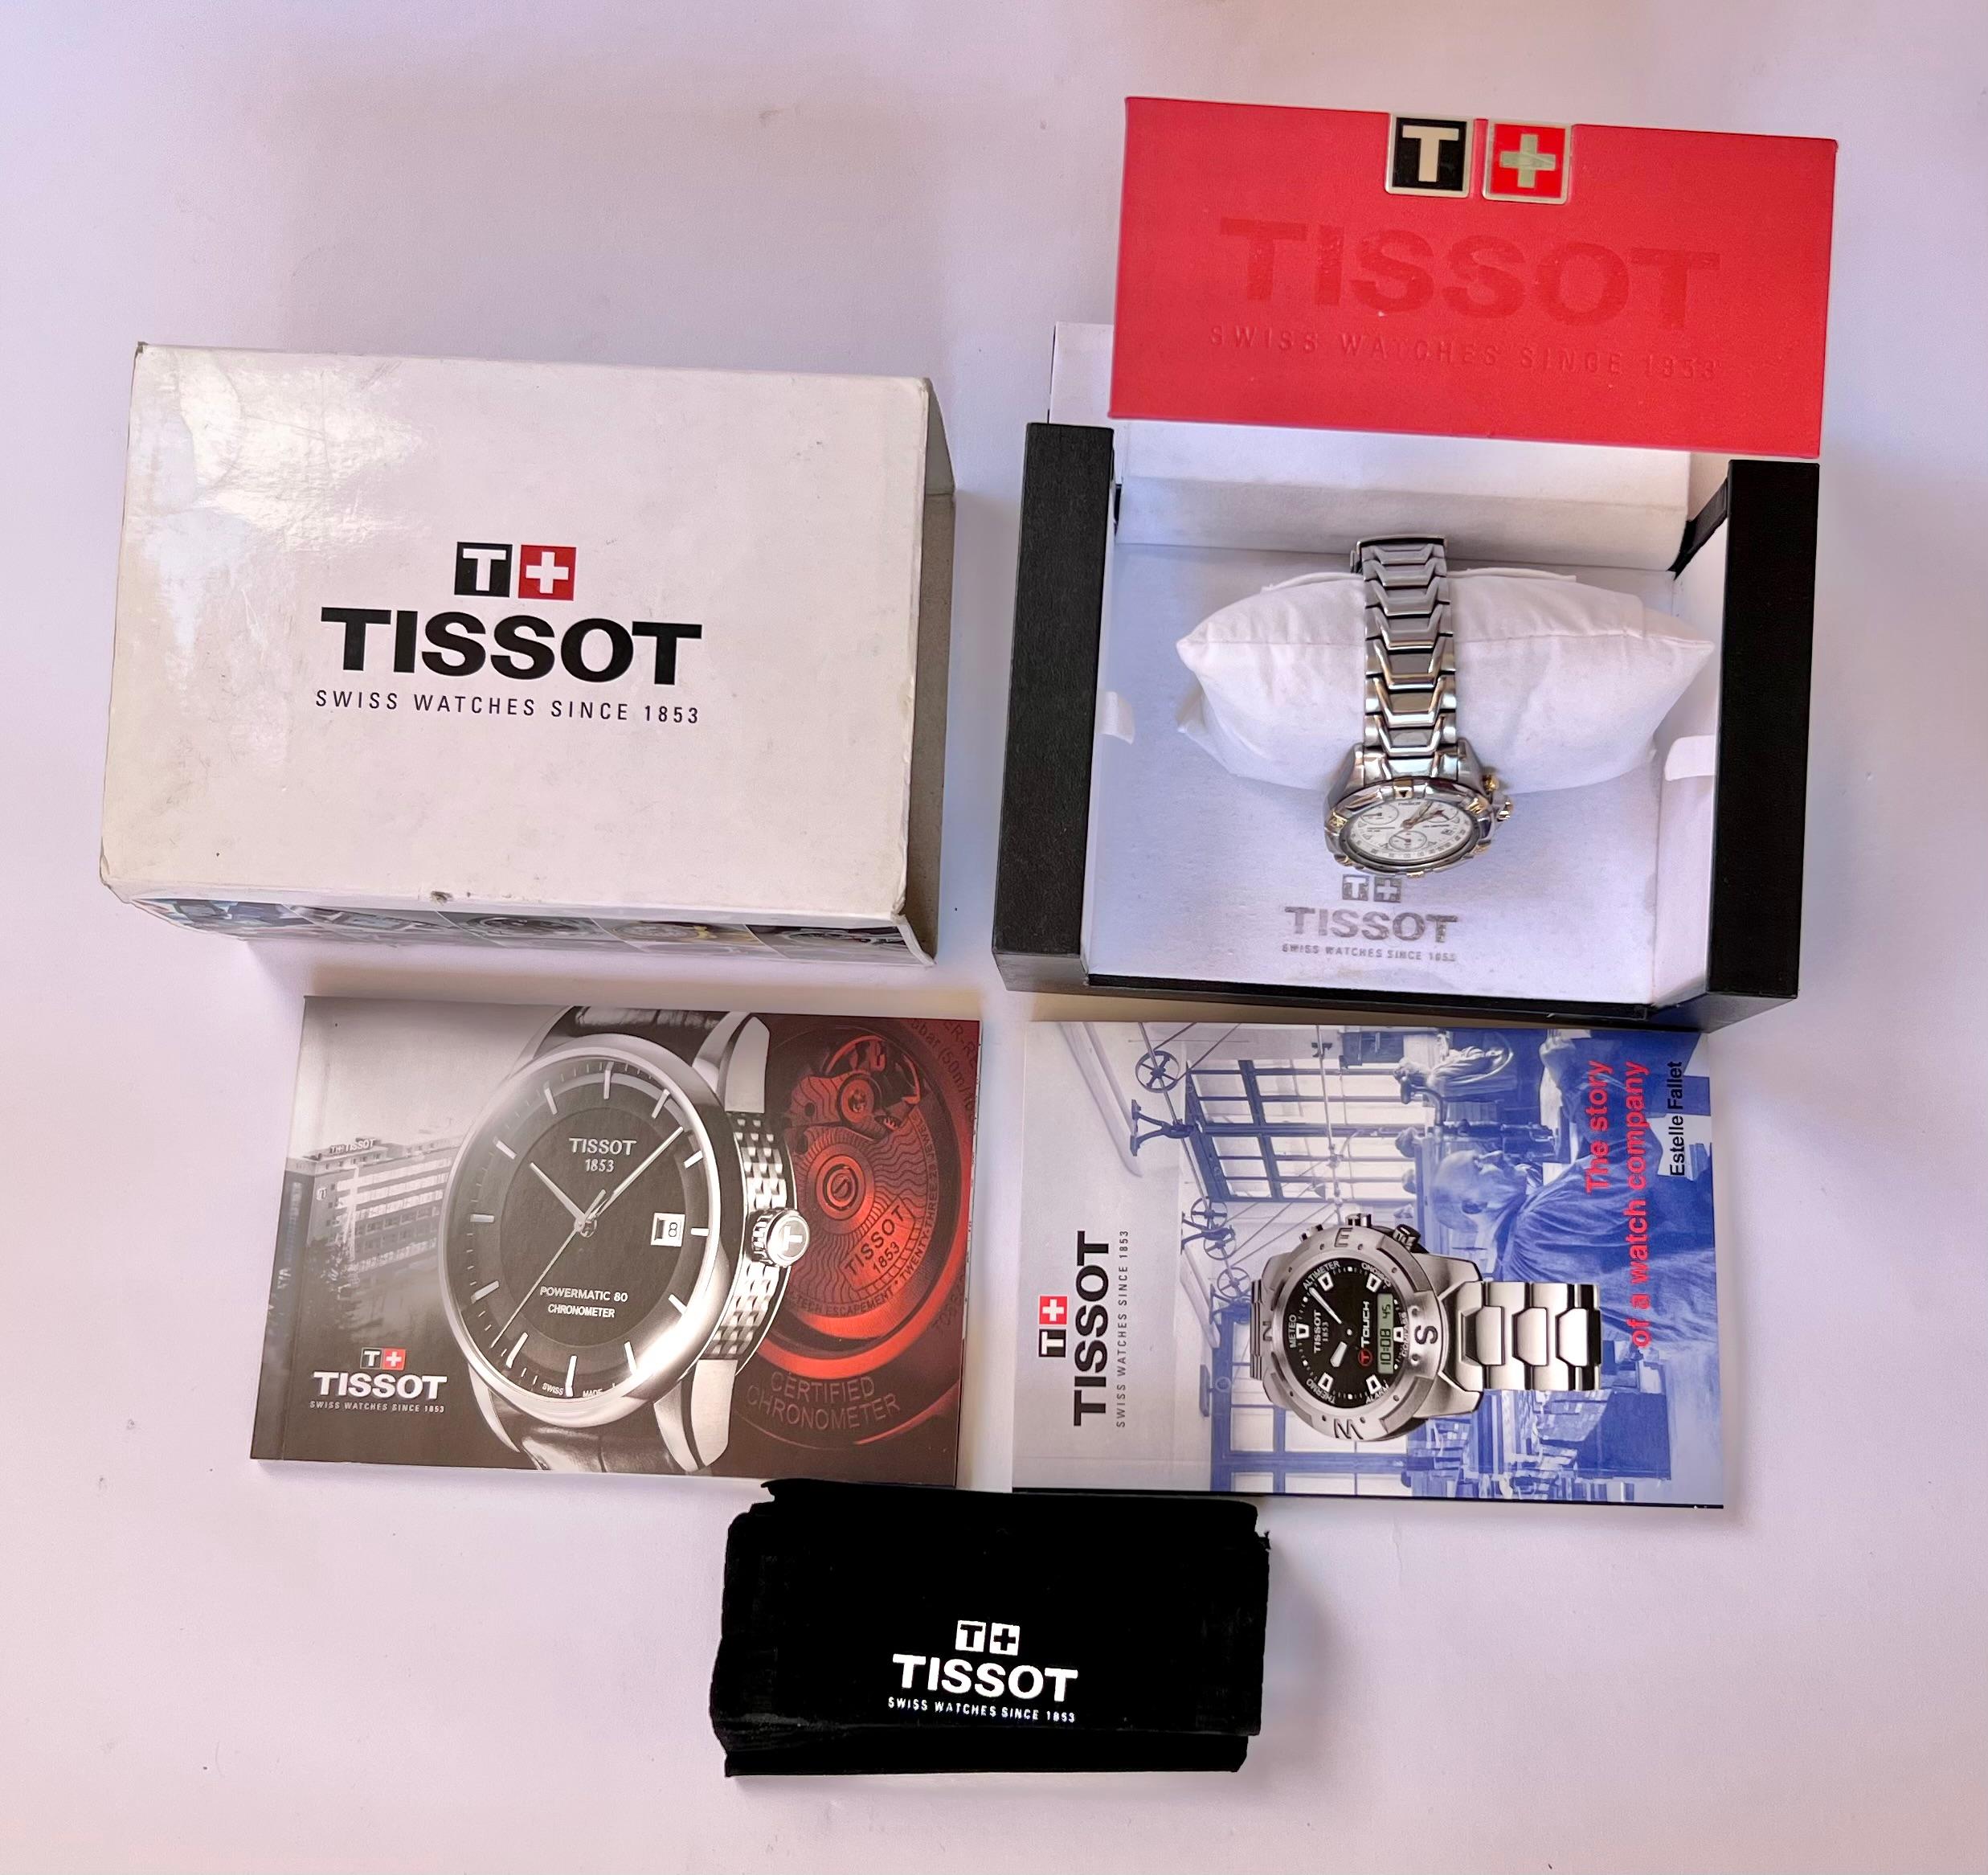 BRAND:Tissot

MODEL: P367/467

FEATURES: Chronograph

DIAL WINDOW MATERIAL: Scratch Resistant Sapphire Crystal

COUNTRY OF MANUFACTURE: Switzerland

MOVEMENT: Quartz

CASE MATERIAL: Stainless Steel

CASE MEASUREMENT: Please check pics

BAND TYPE :